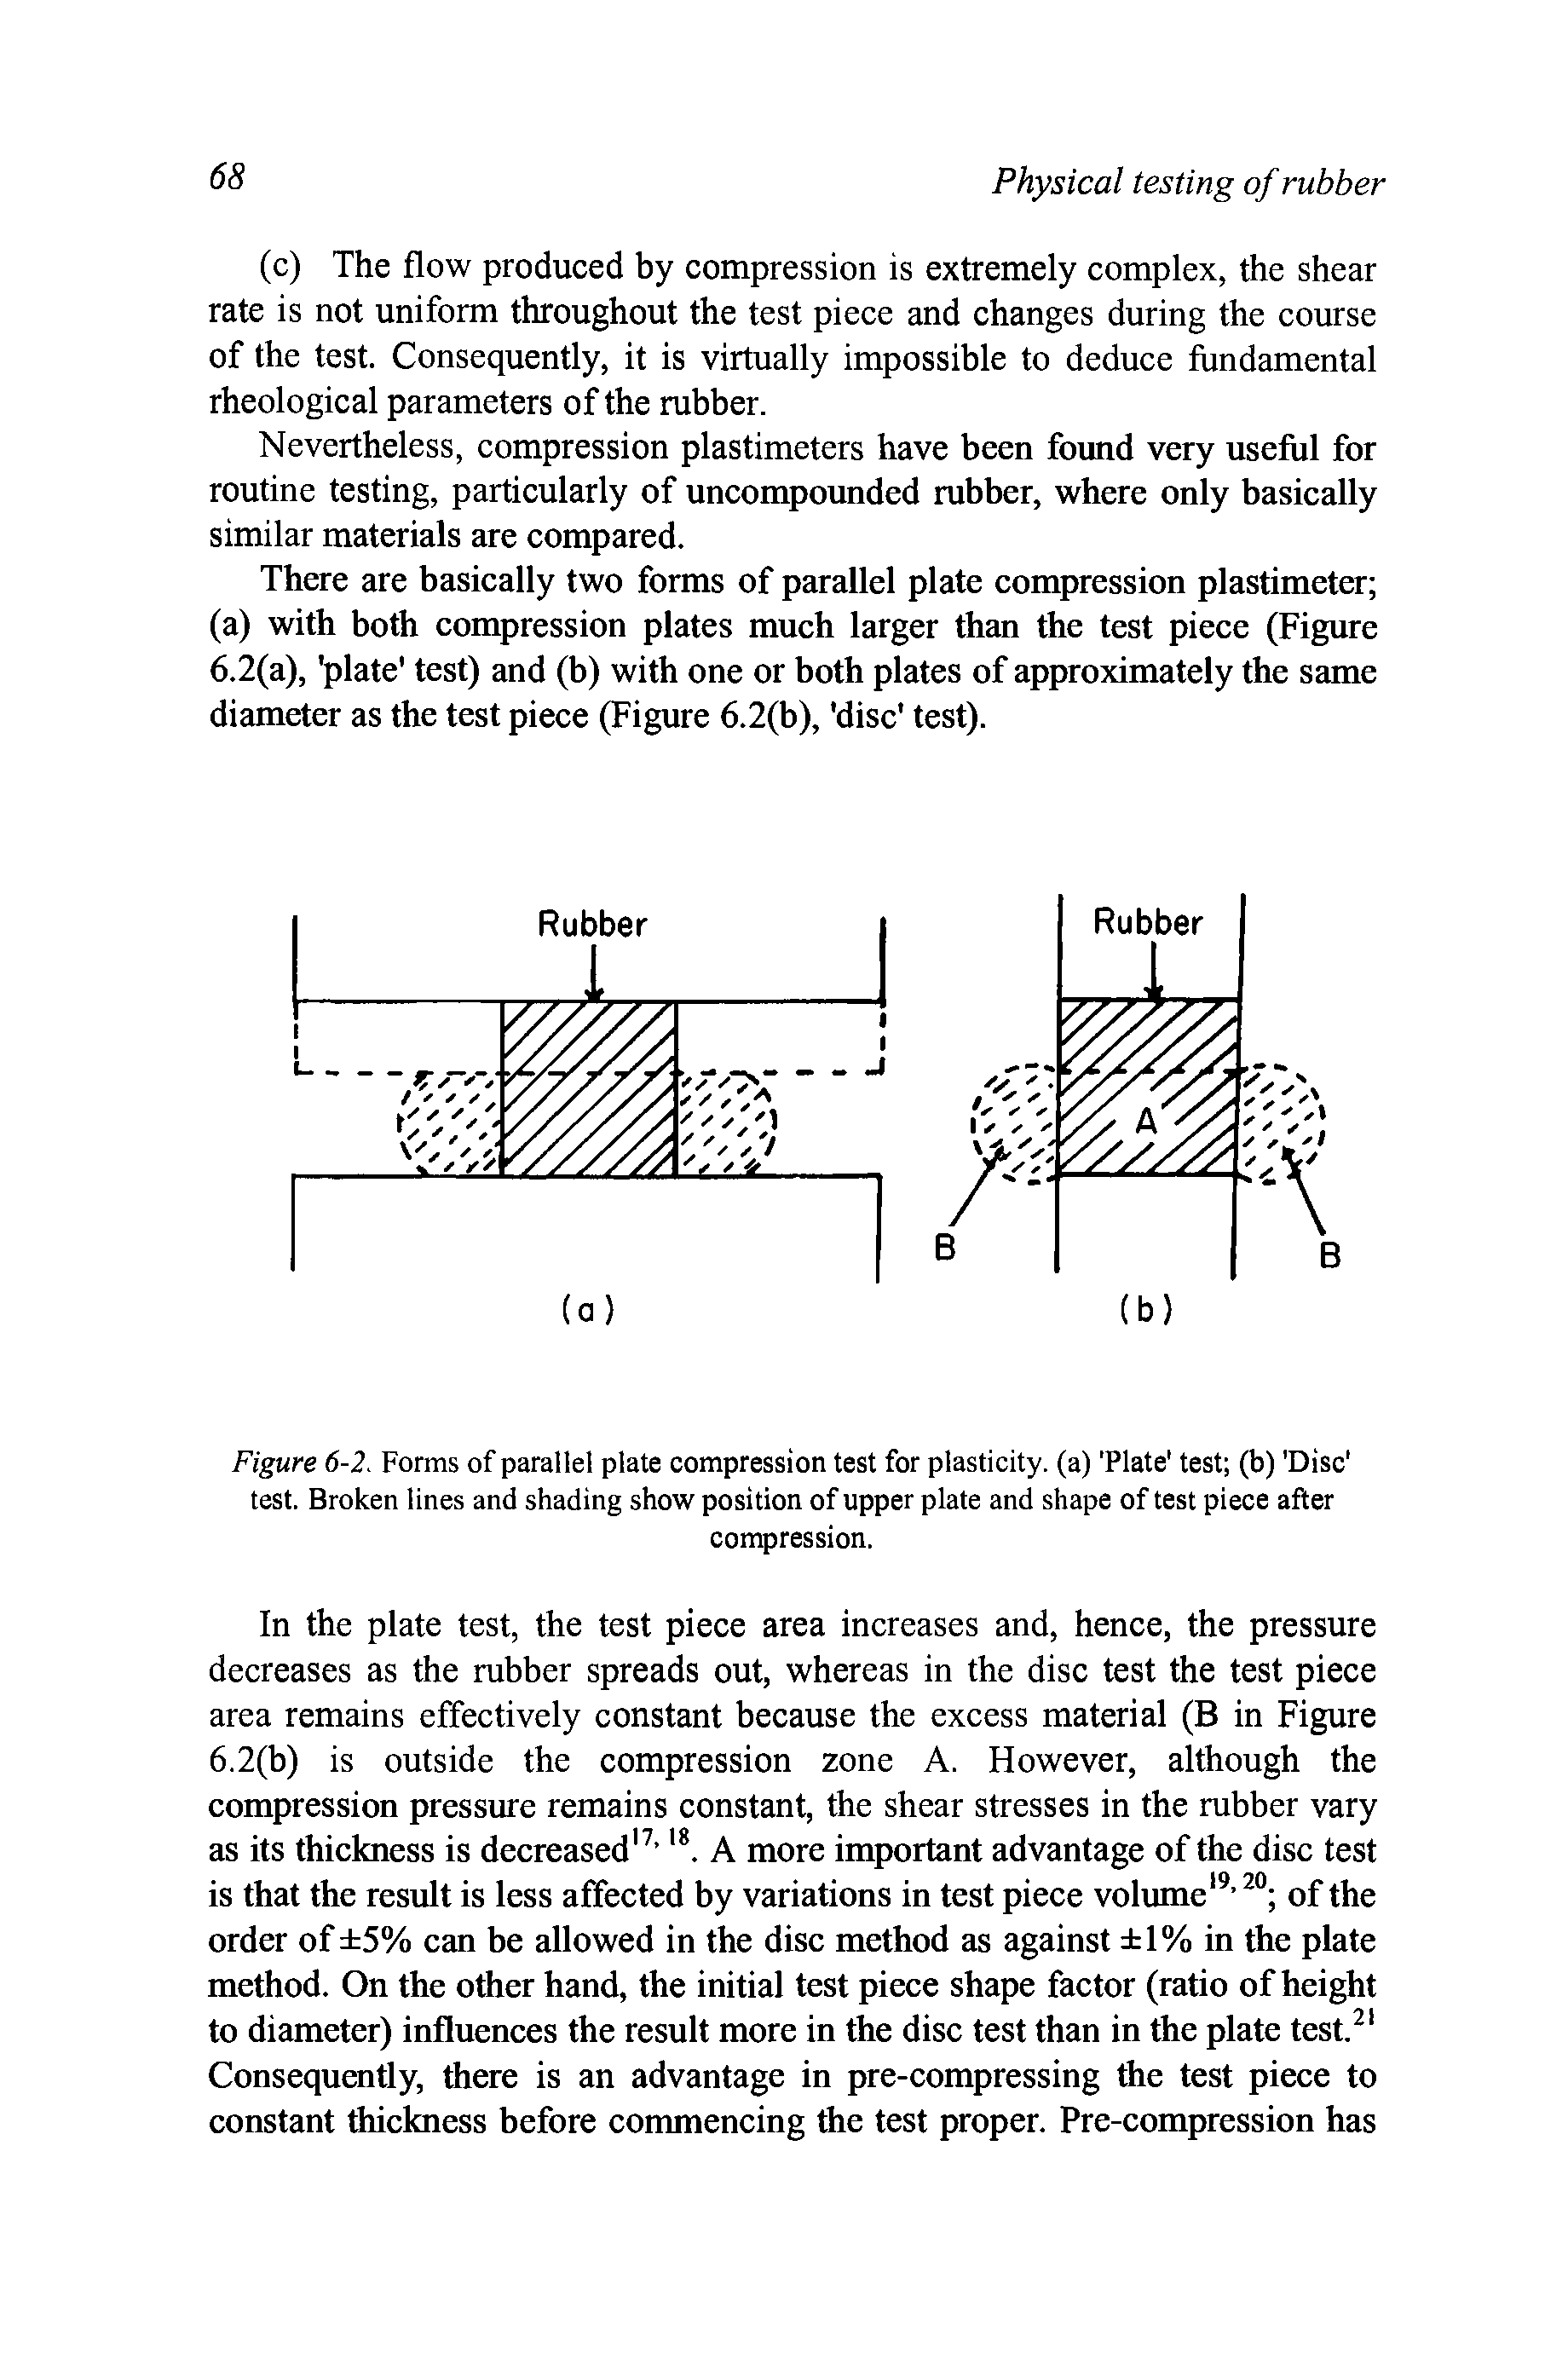 Figure 6-2. Forms of parallel plate compression test for plasticity, (a) Plate test (b) Disc test. Broken lines and shading show position of upper plate and shape of test piece after...